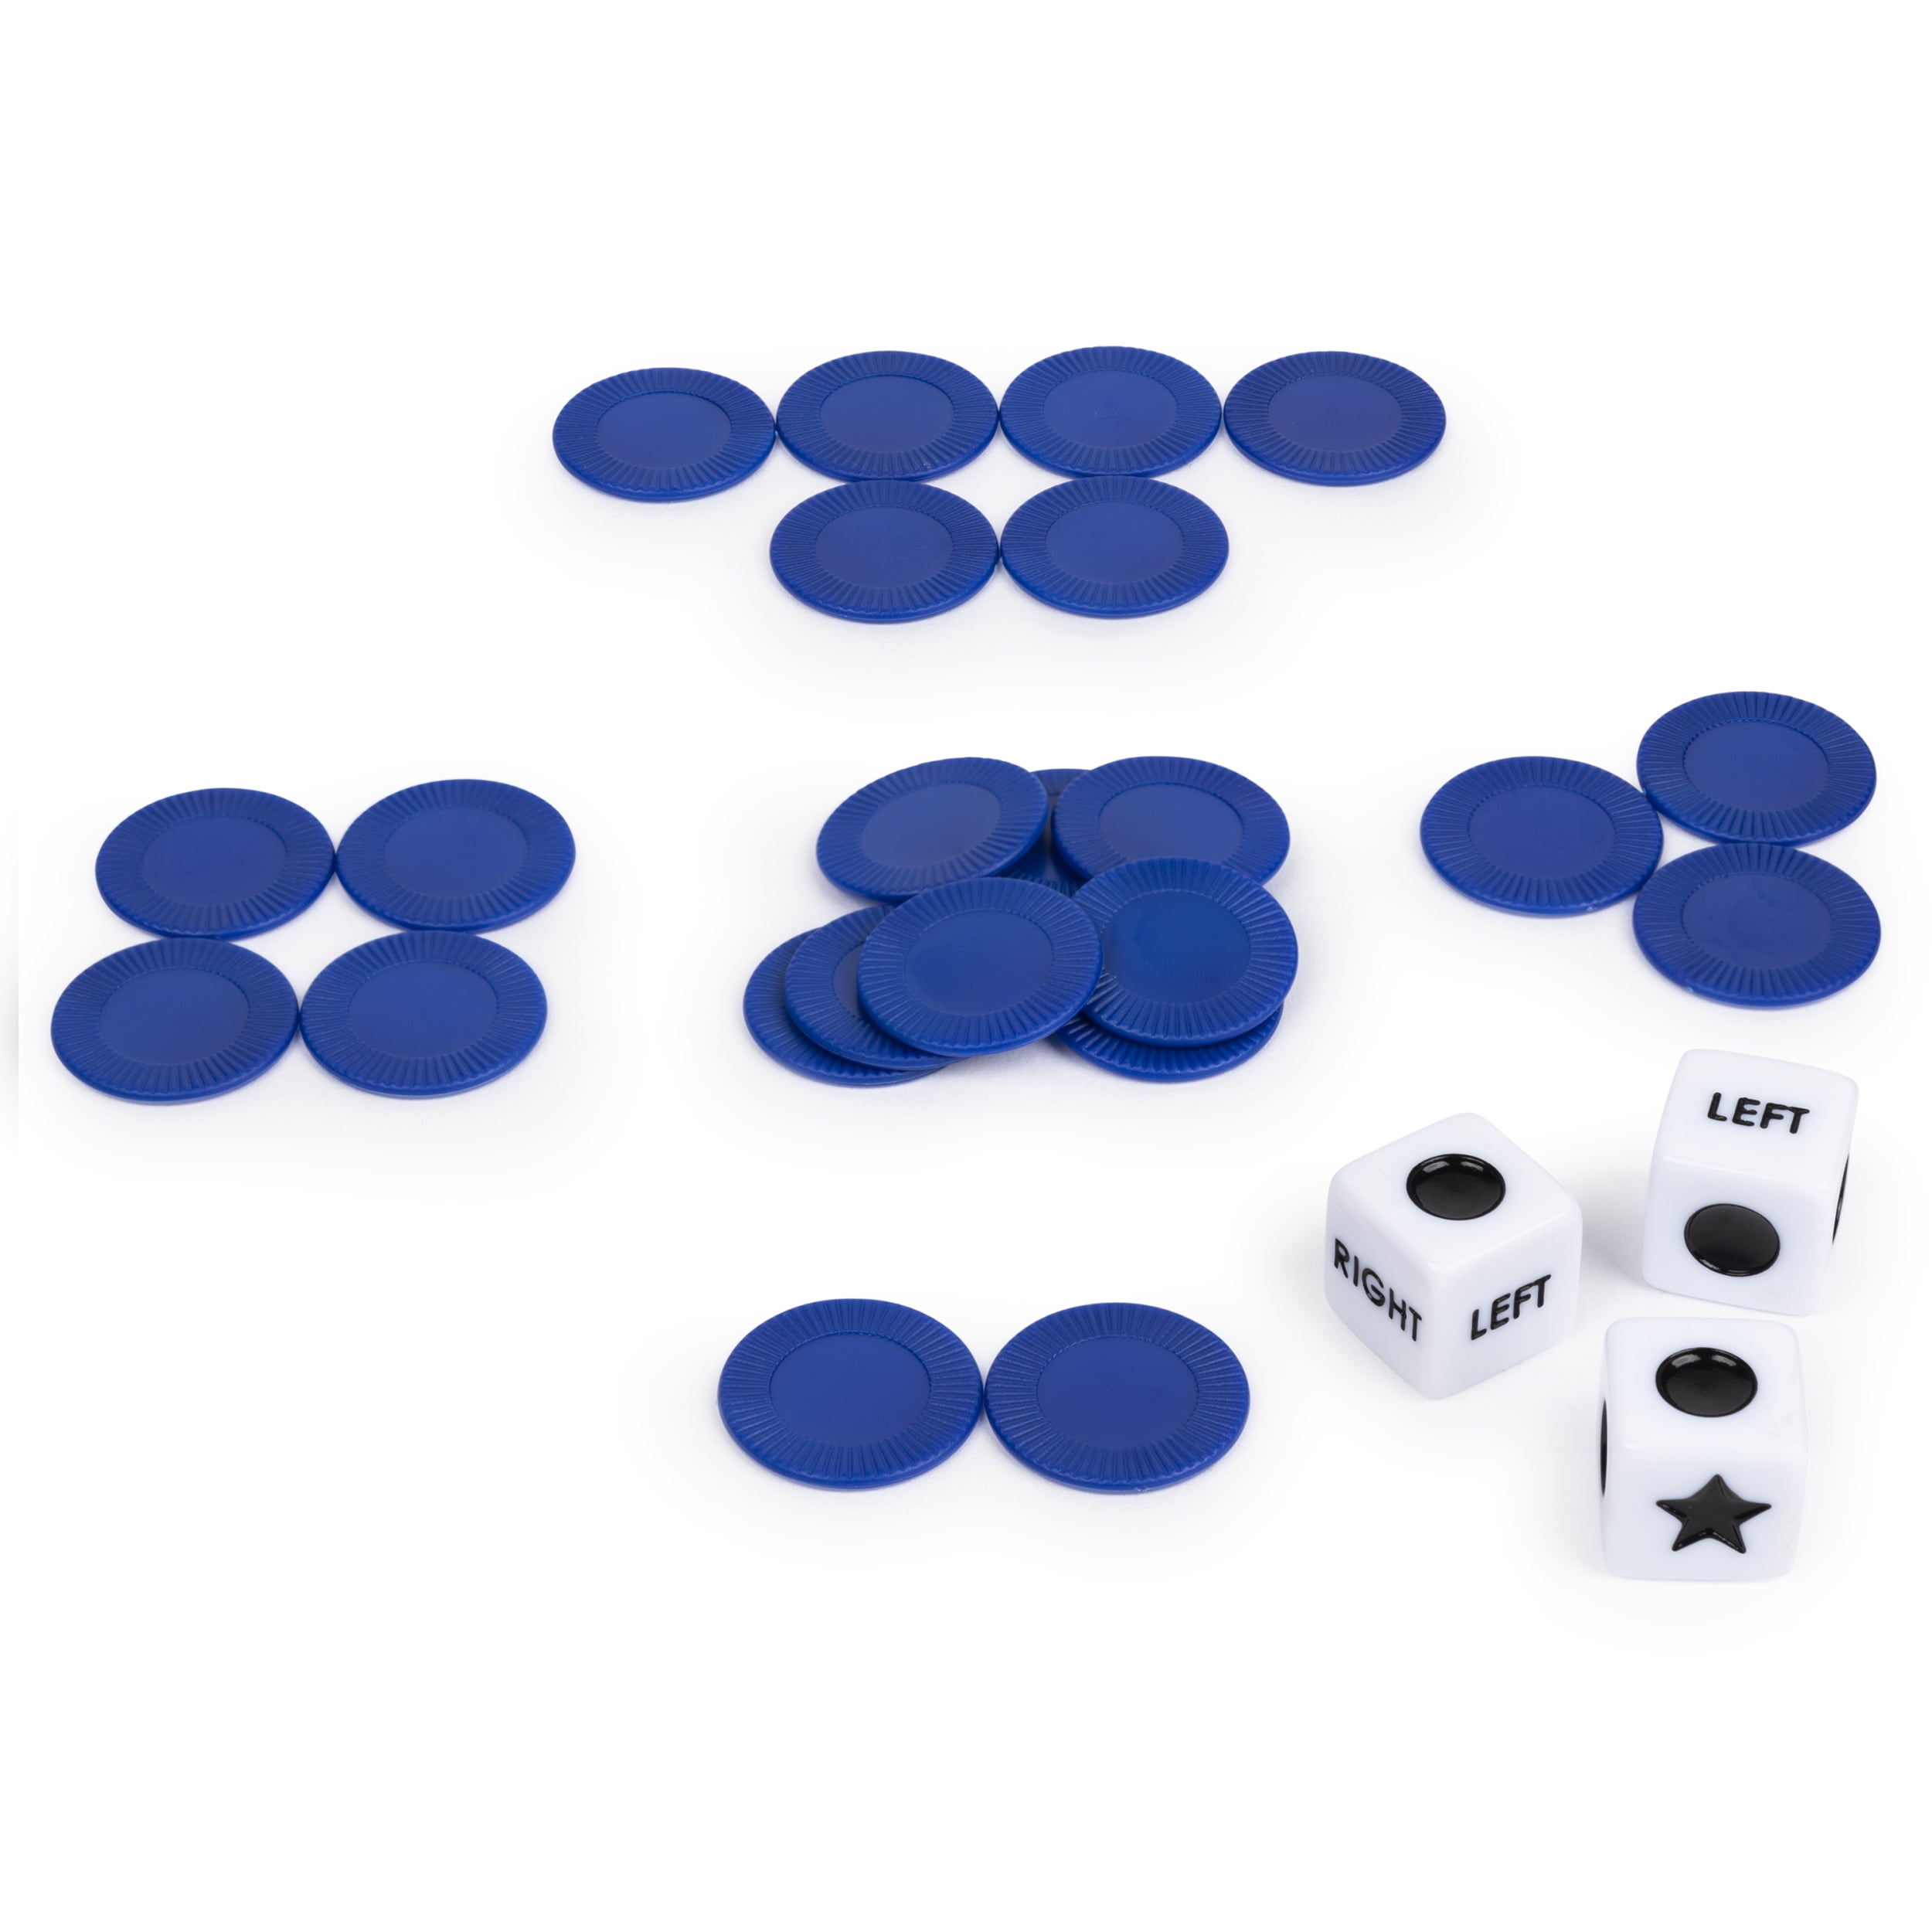 New LCR® Left Center Right™ Dice Game Blue Tin Free Ship US SELLER 